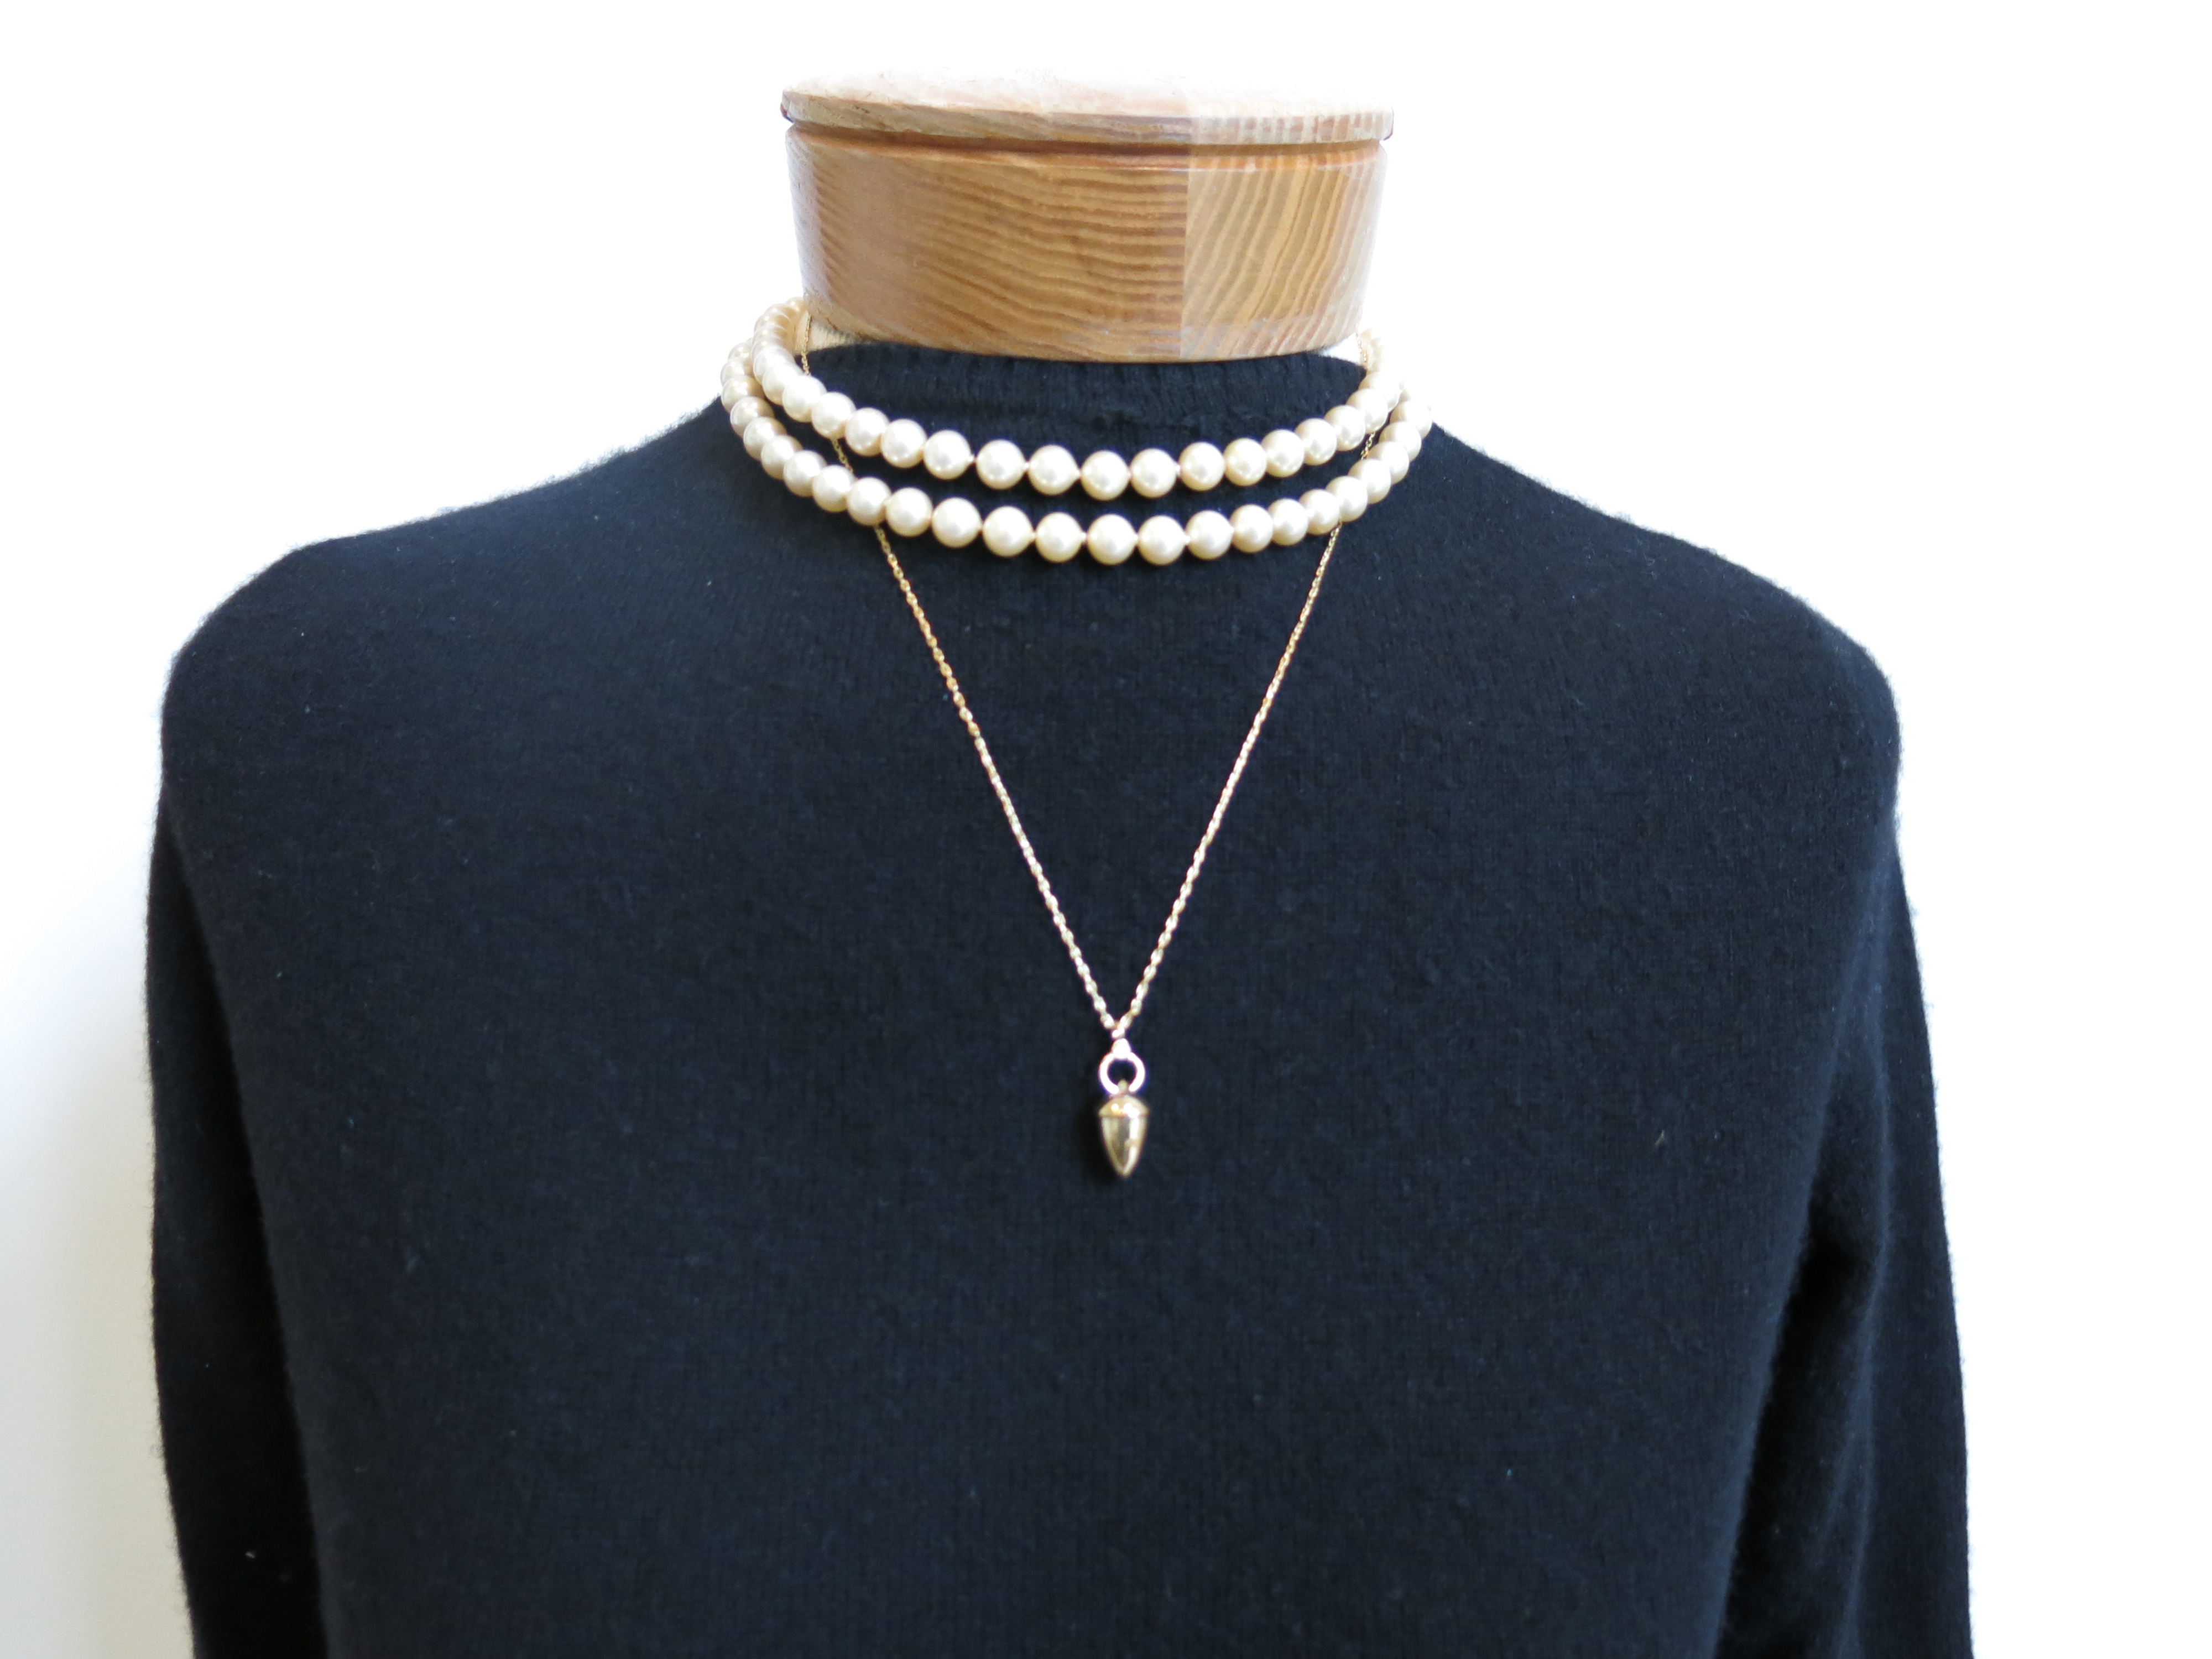 A pearl choker is too conservative to layer with a gold charm